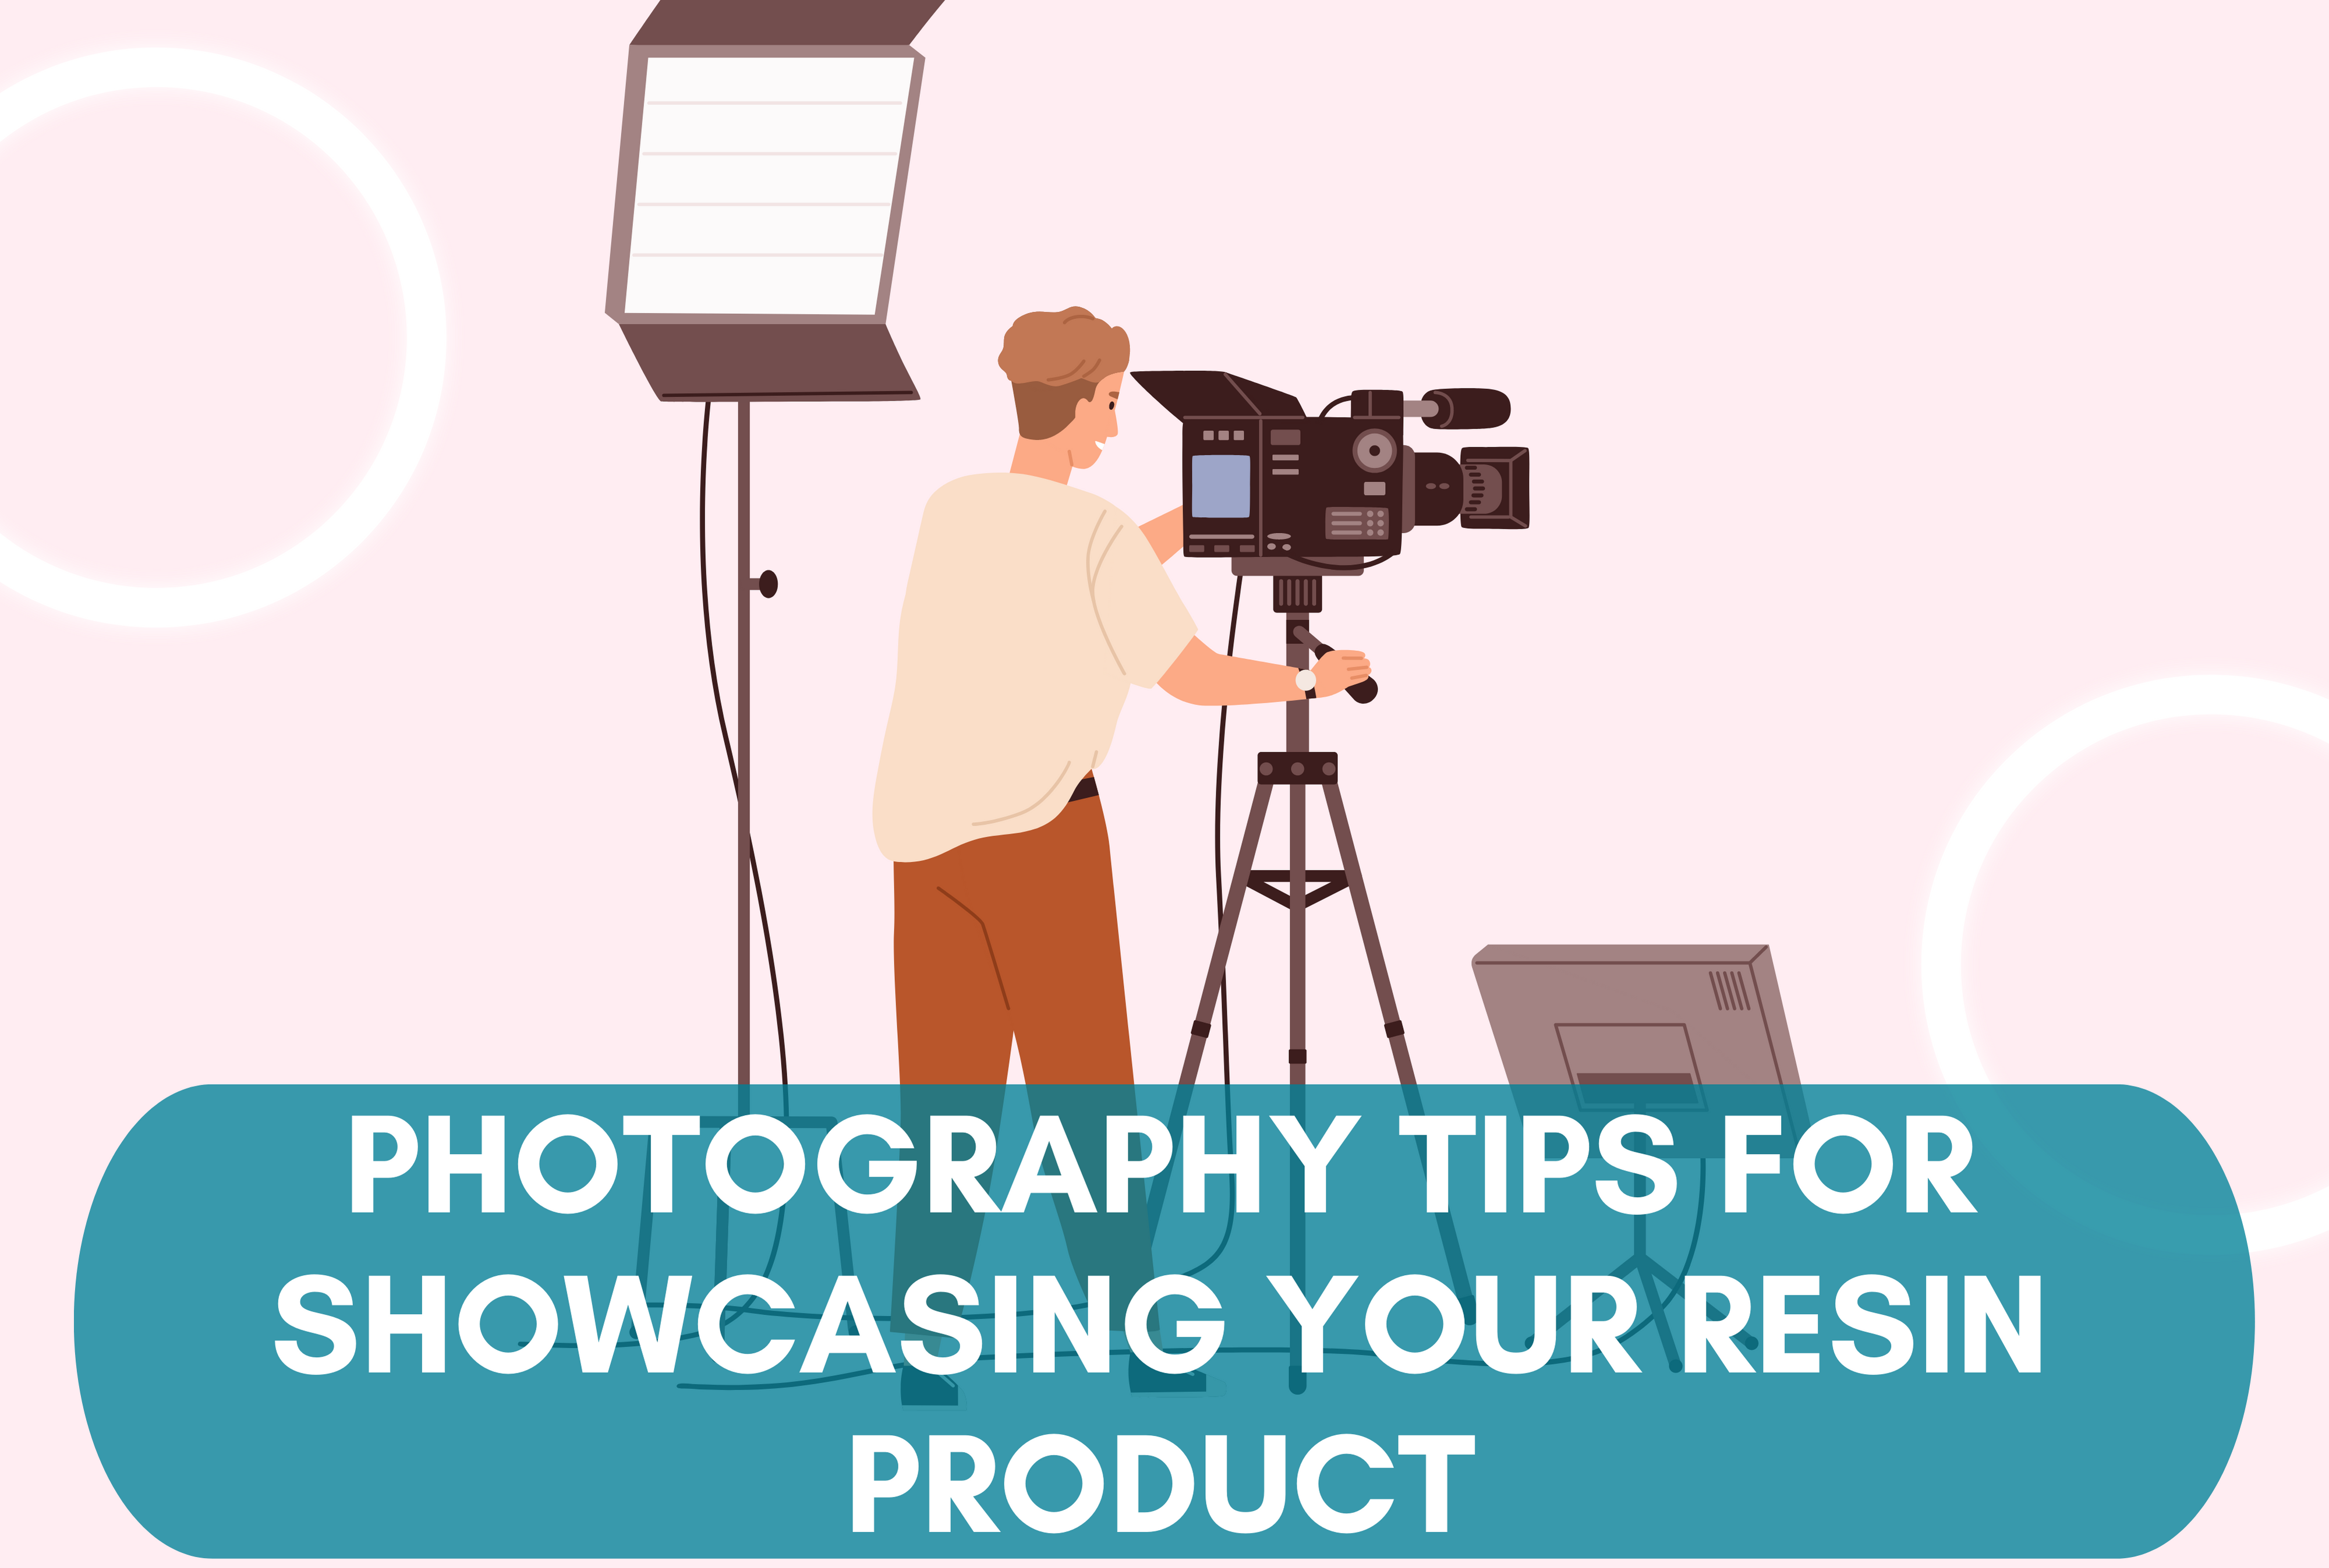 Photography tips for showcasing your resin product